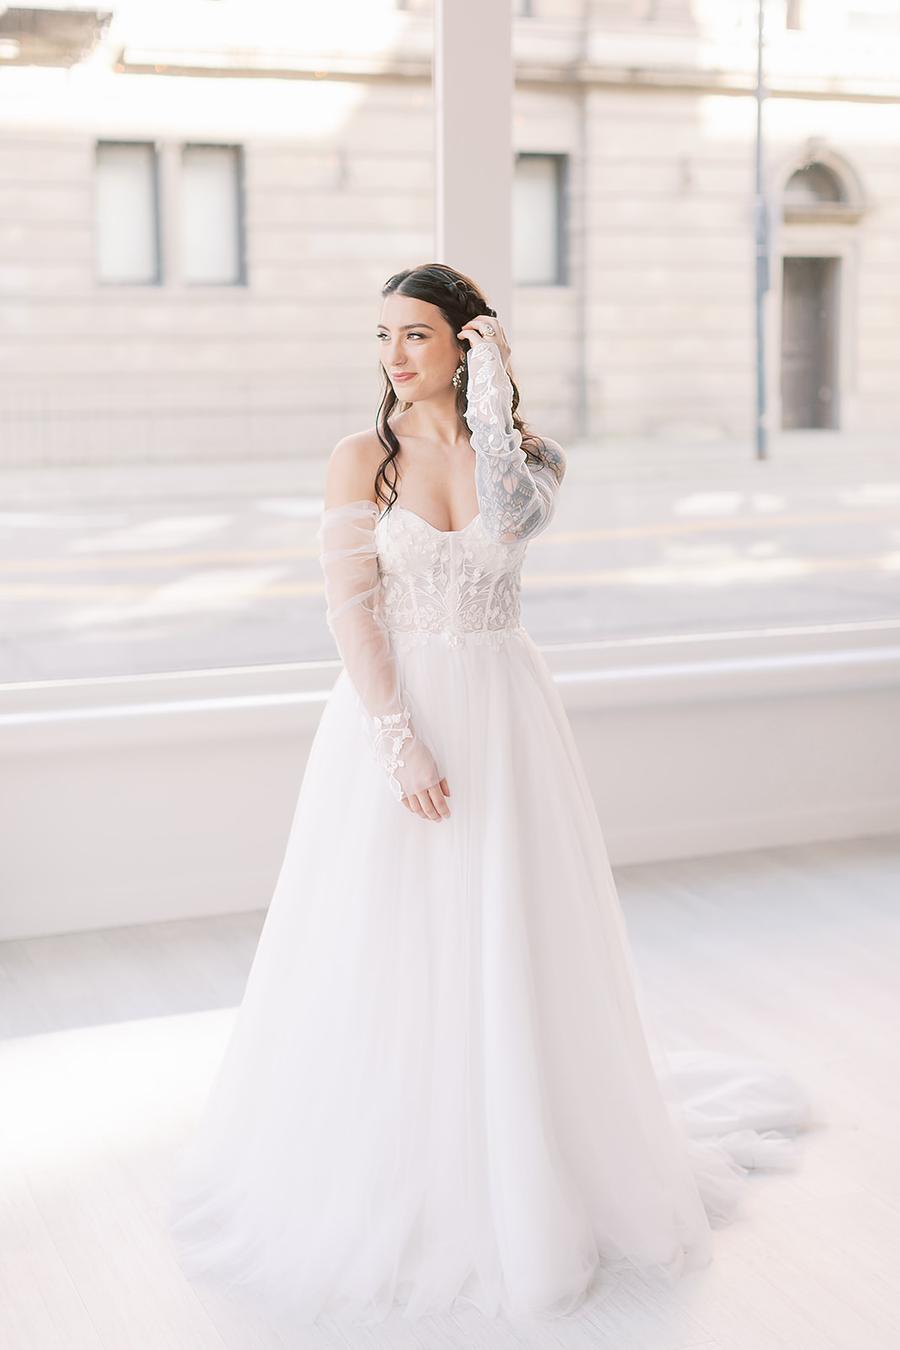 One bride was wearing a gorgeous off the shoulder A line lace wedding dress with long sleeves and curls